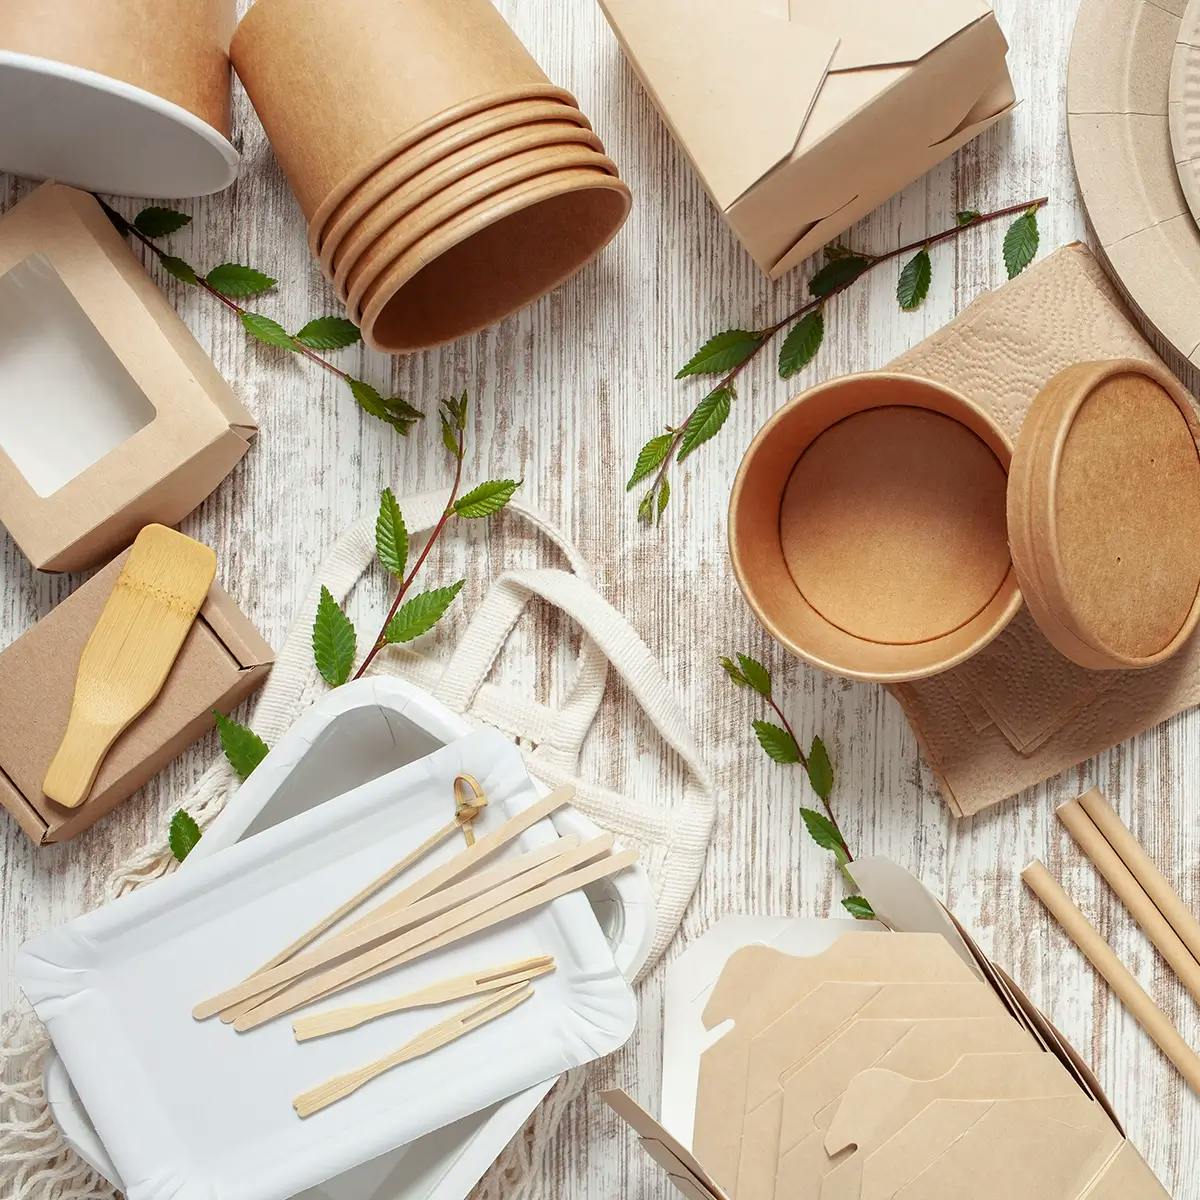 Eco-friendly party items made from cardboard and bamboo.